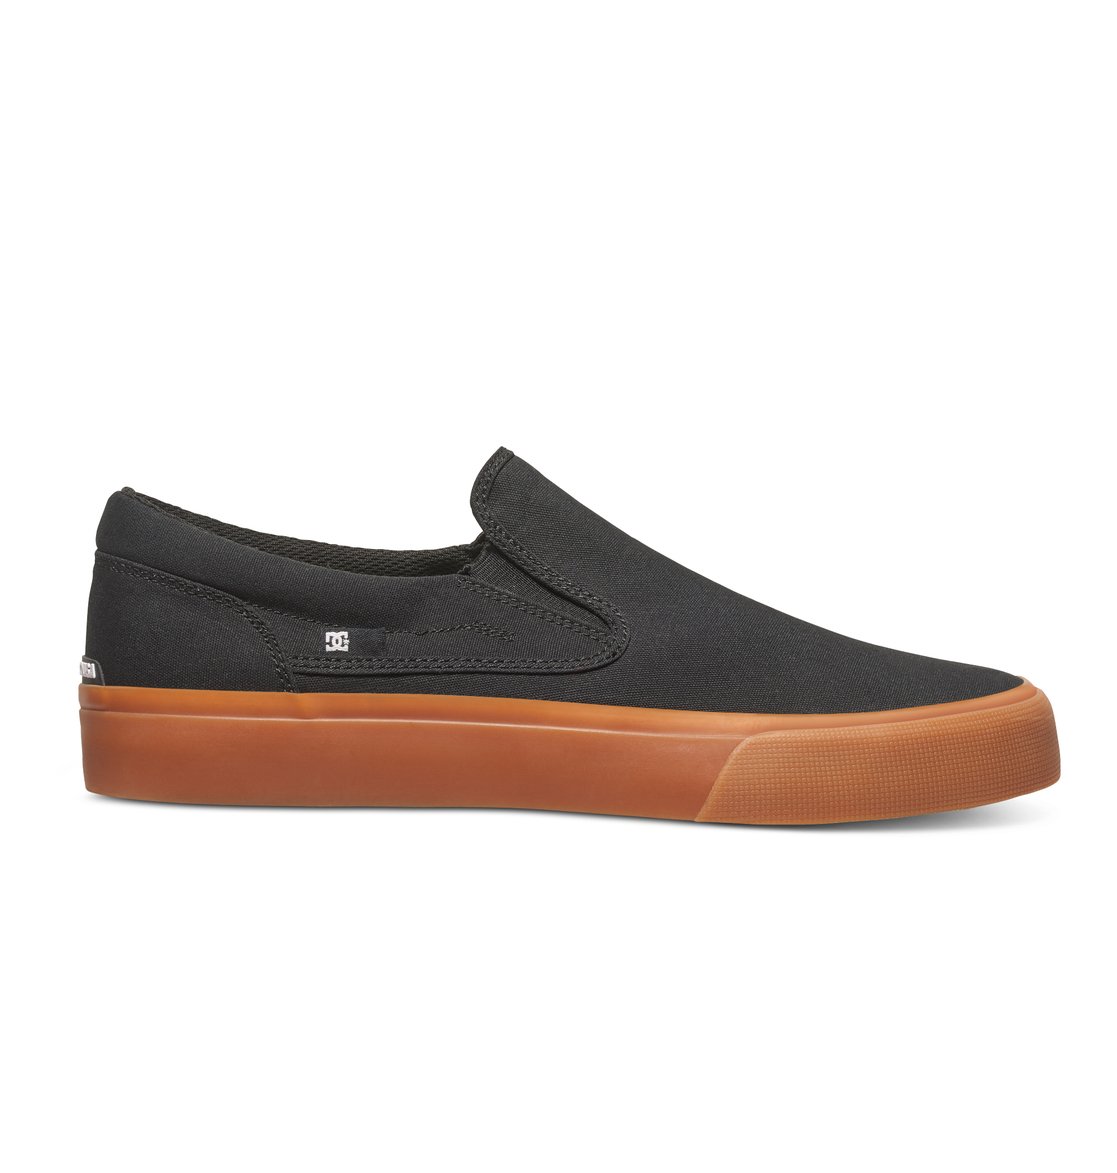 Trase Slip On Shoes ADYS300184 | DC Shoes